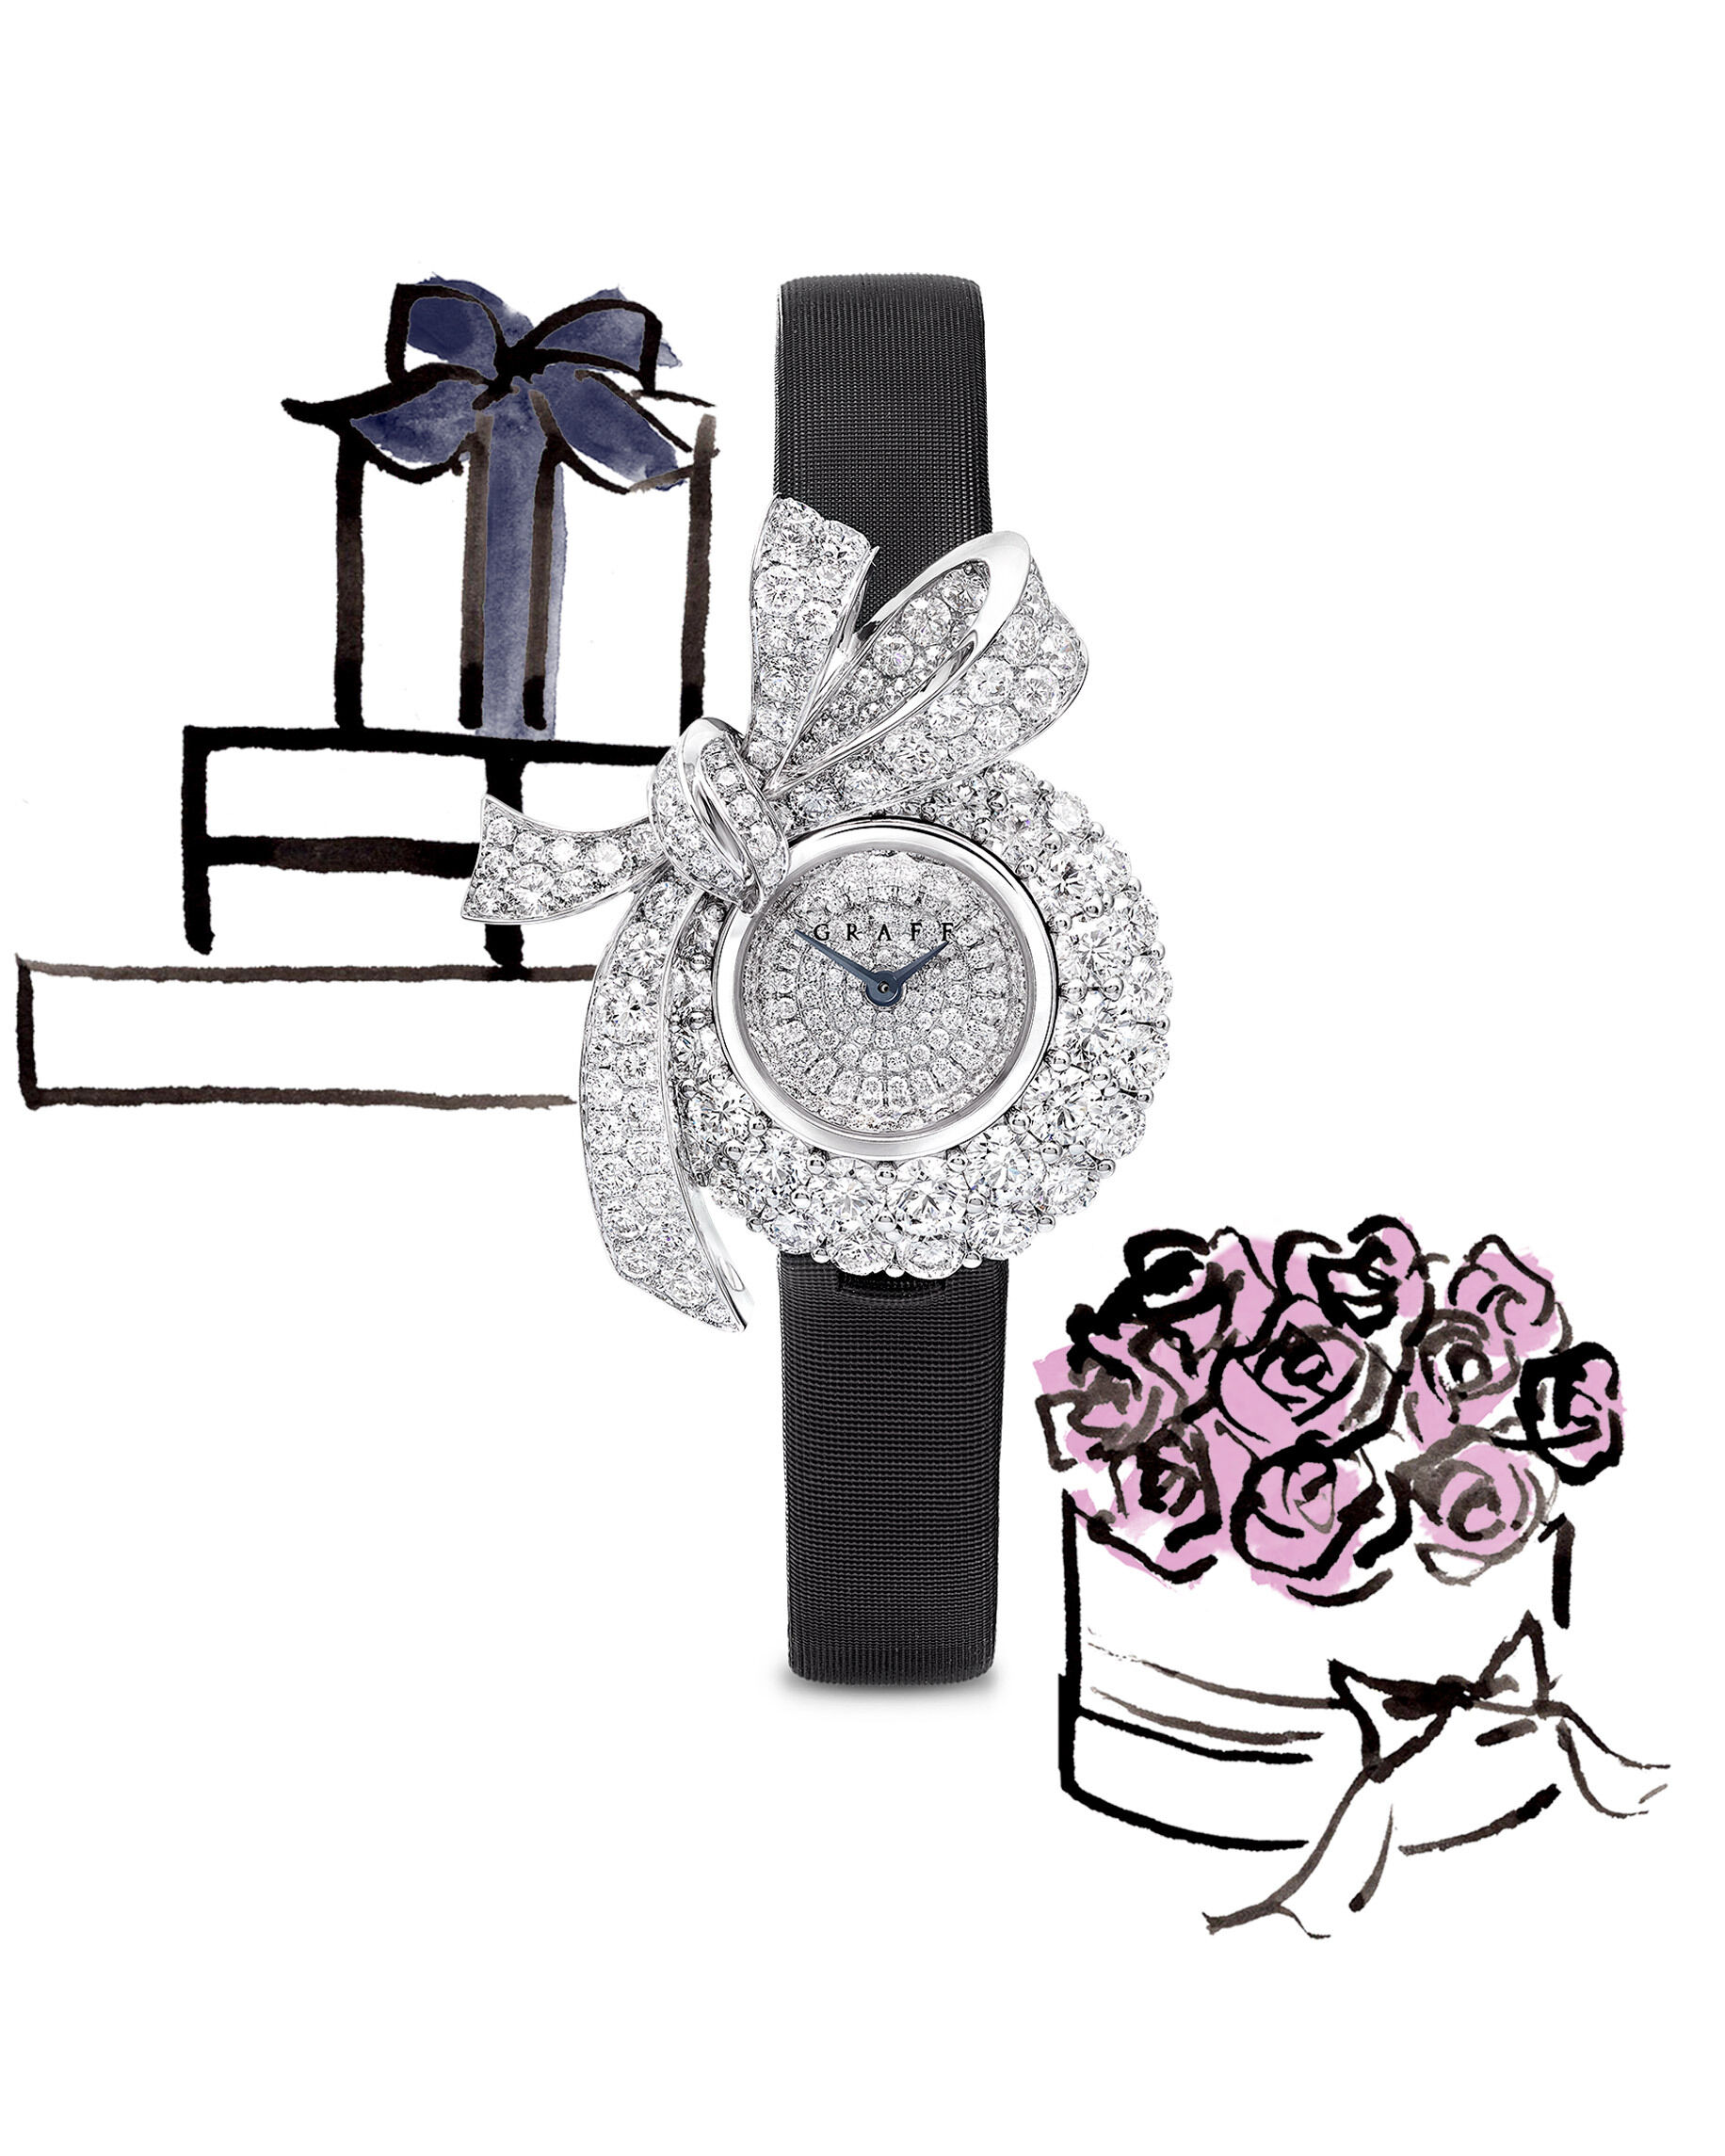 Image of Graff Spiral watch with pink satin strap, pink mother of pearl, rose gold and diamonds